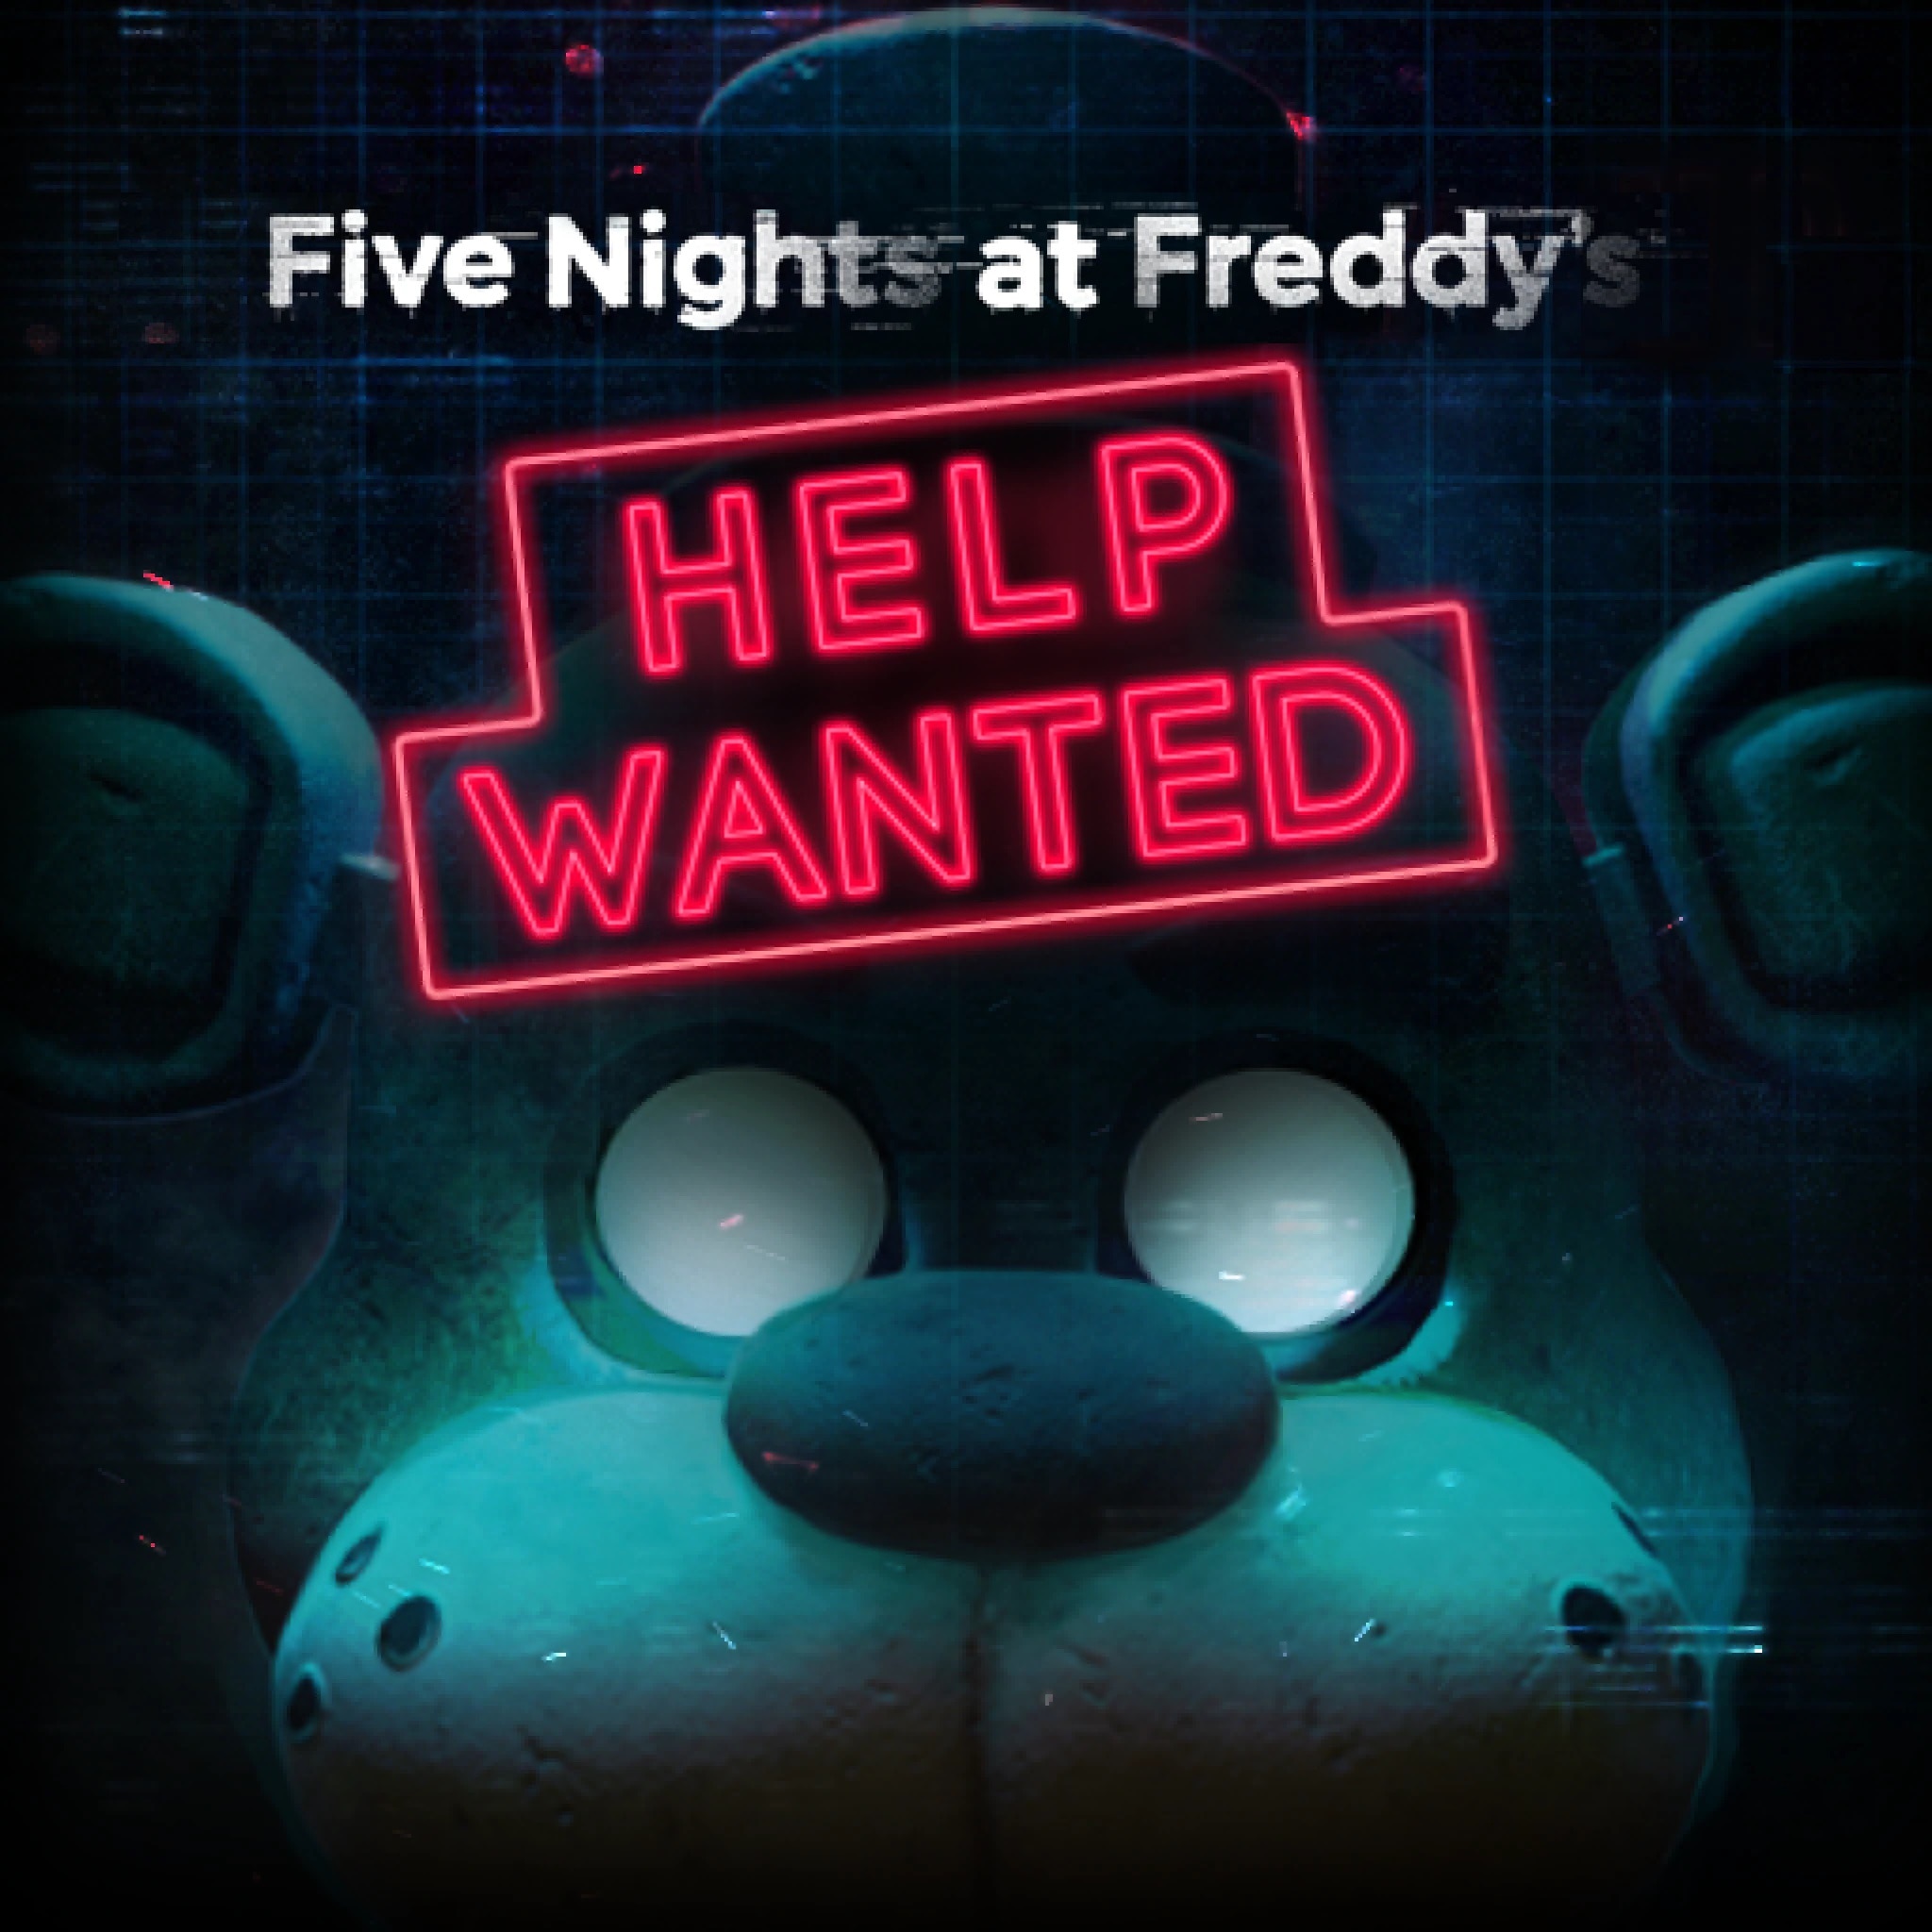 Five Nights at Freddy's (FNaF) - Security Breach (Unofficial